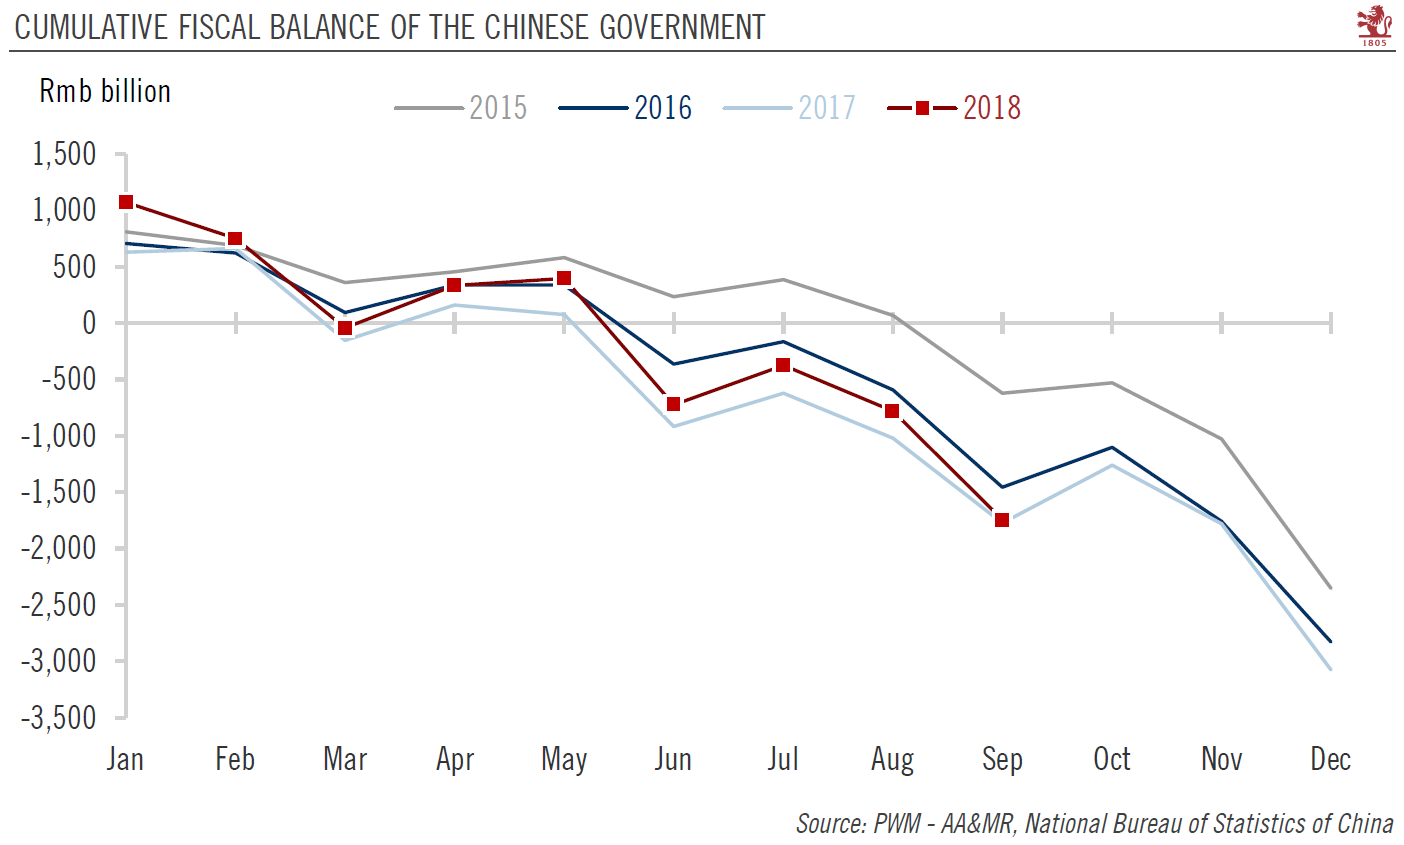 China’s fiscal policy turns more proactive